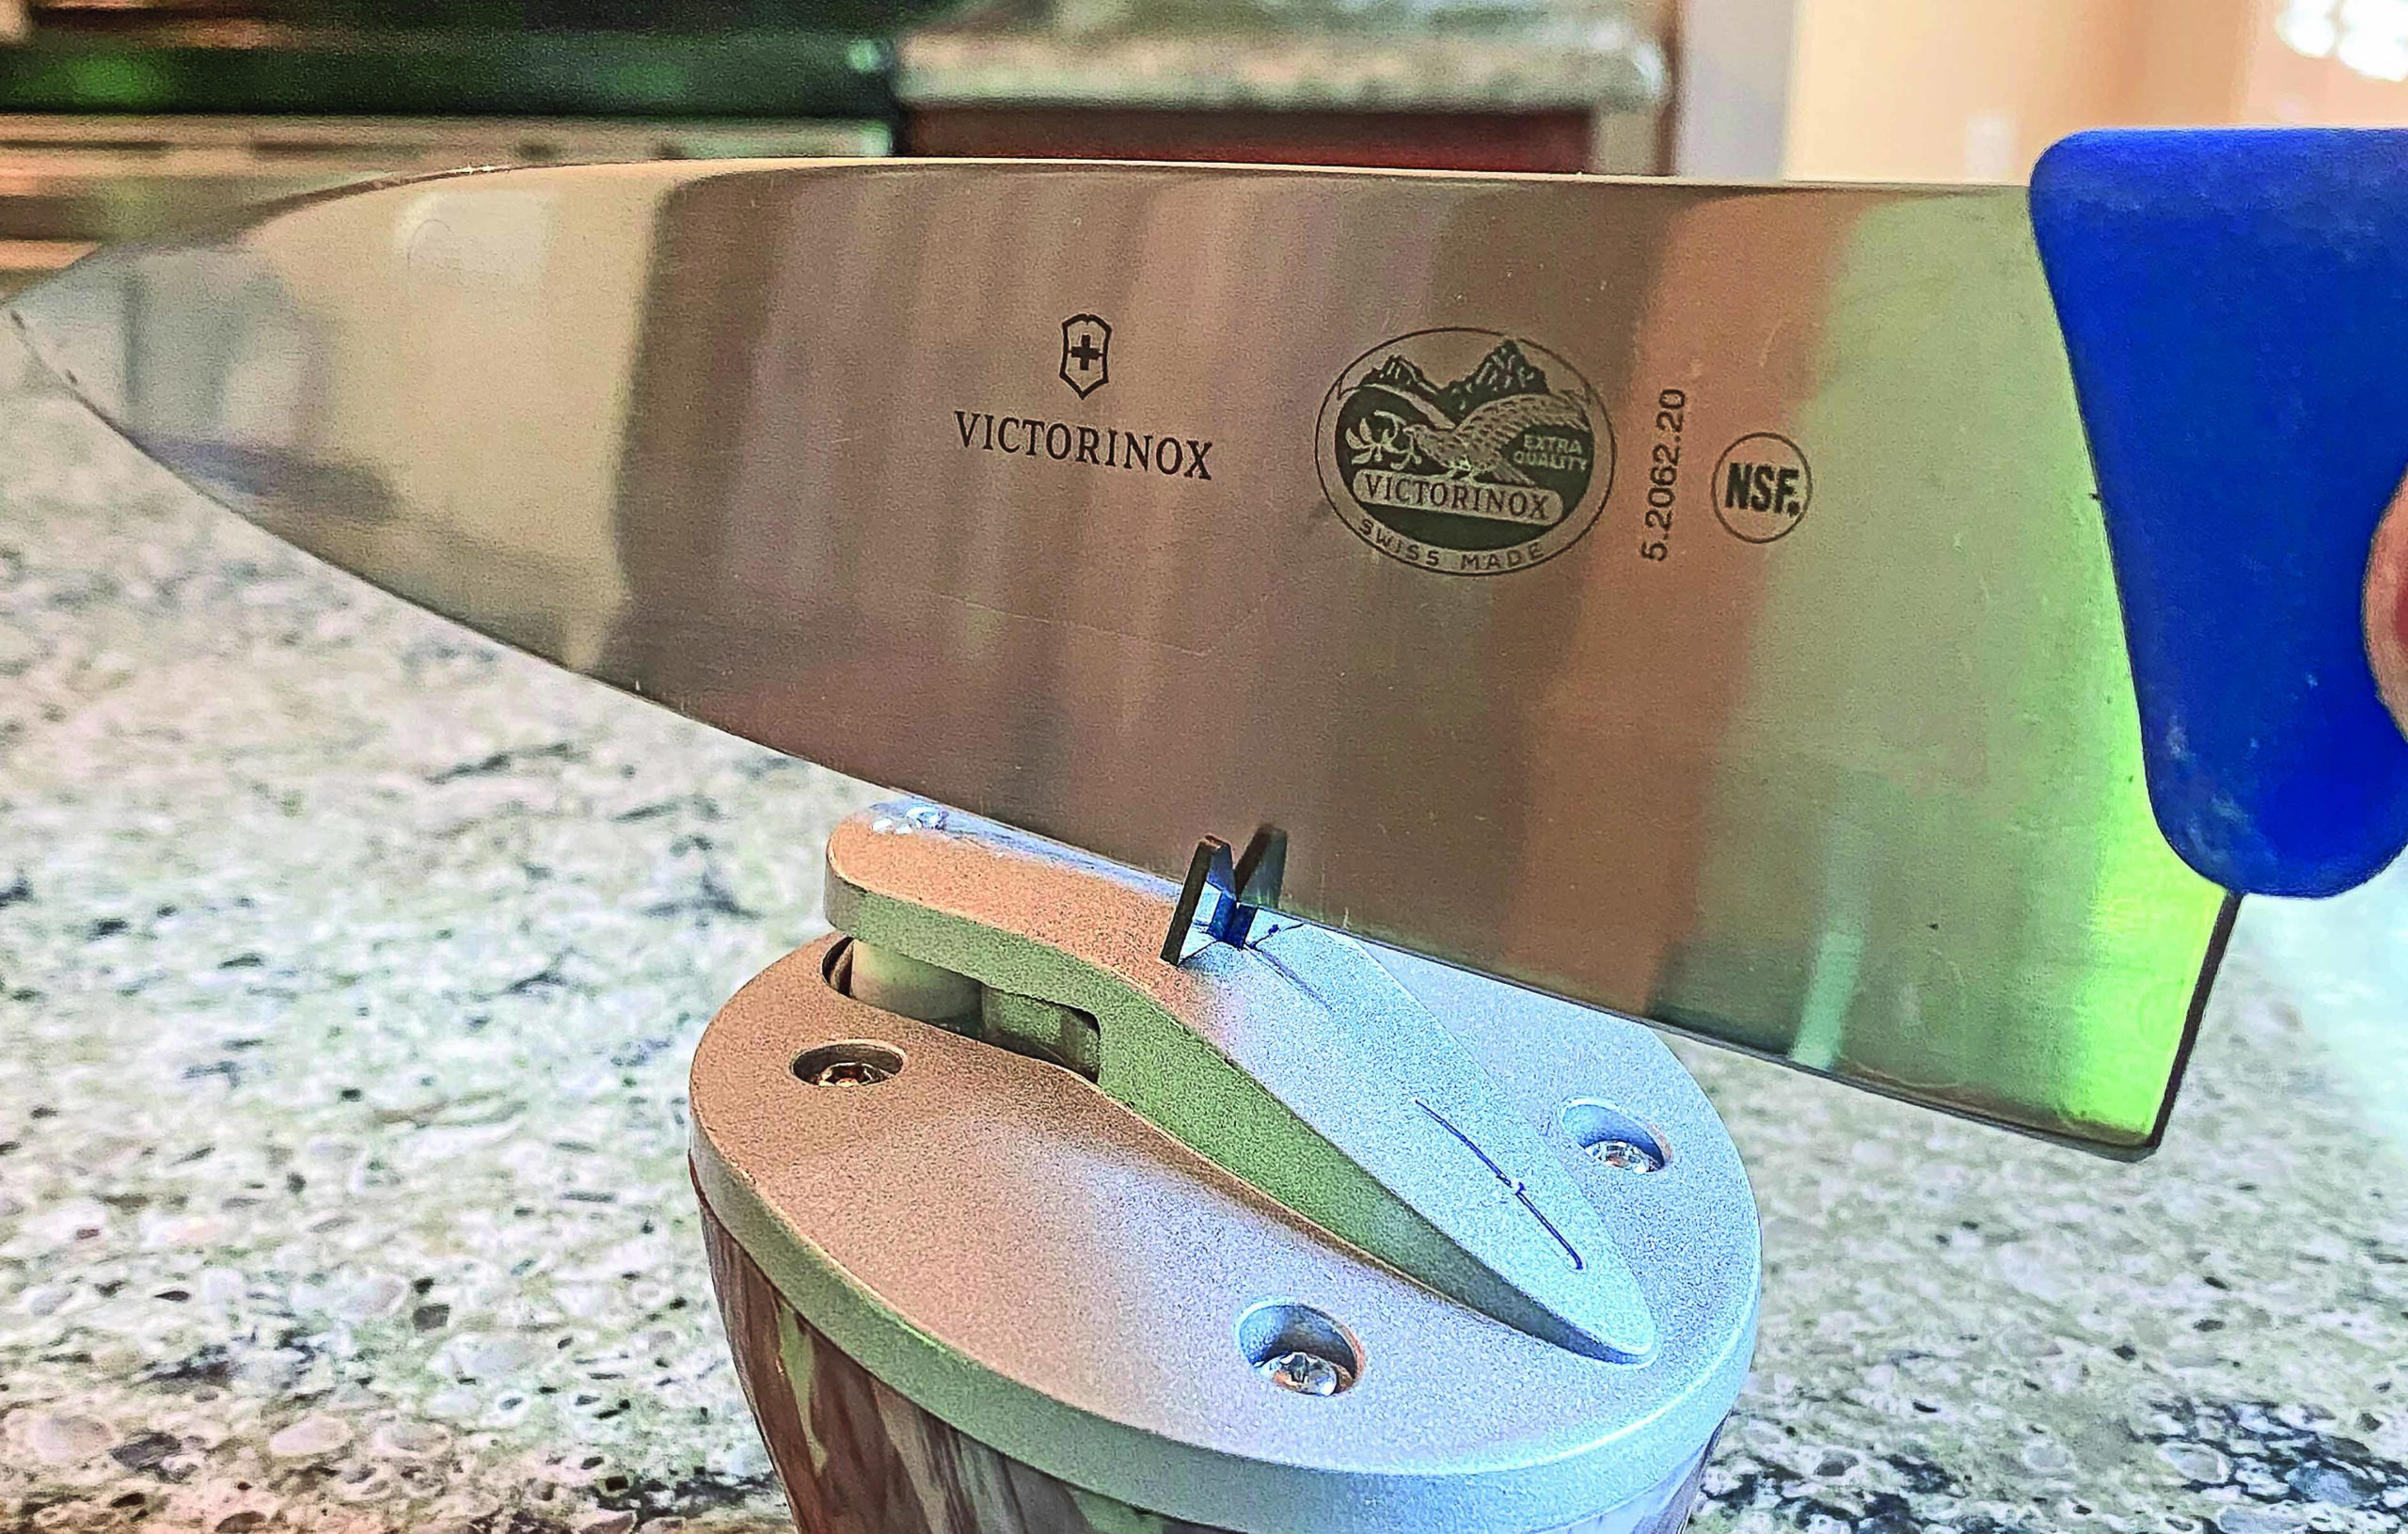 The Camillus Extreme Edge V2 Knife & Shear Sharpener features a pull-through design with carbide media for kitchen knives and fine ceramic for shears to establish edges in quick fashion. 